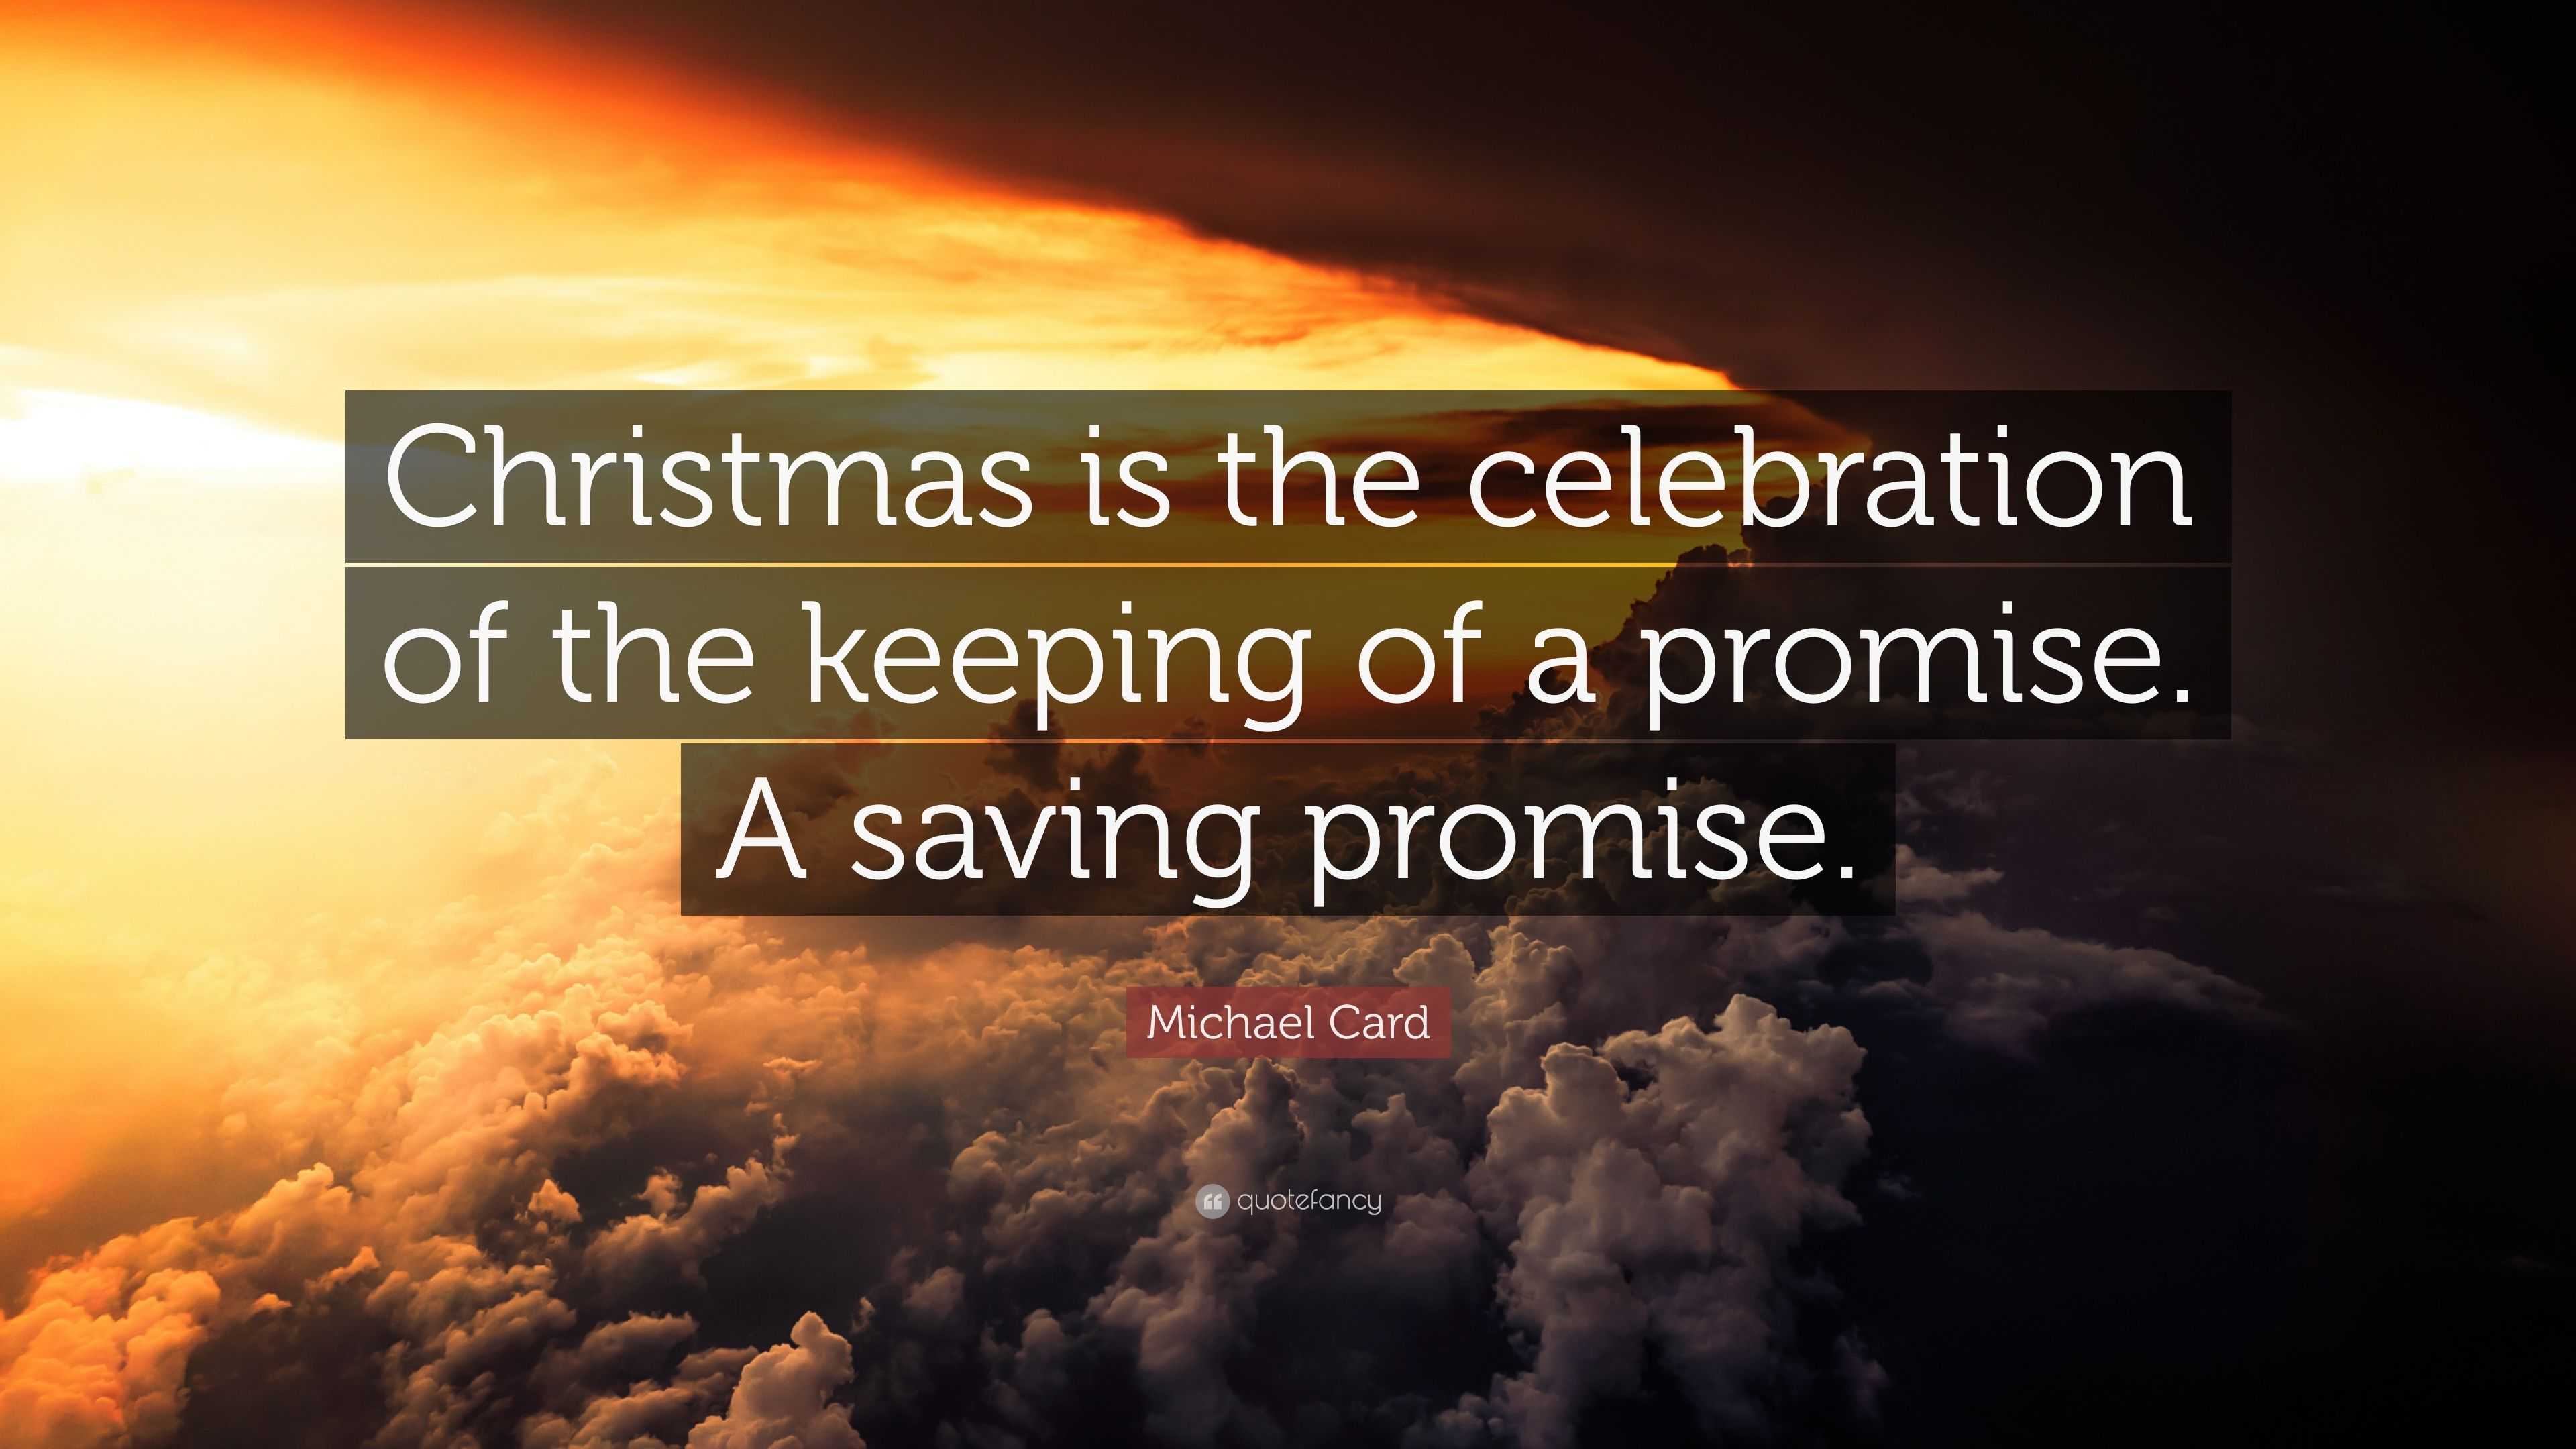 Michael Card Quote: “Christmas is the celebration of the keeping of a ...